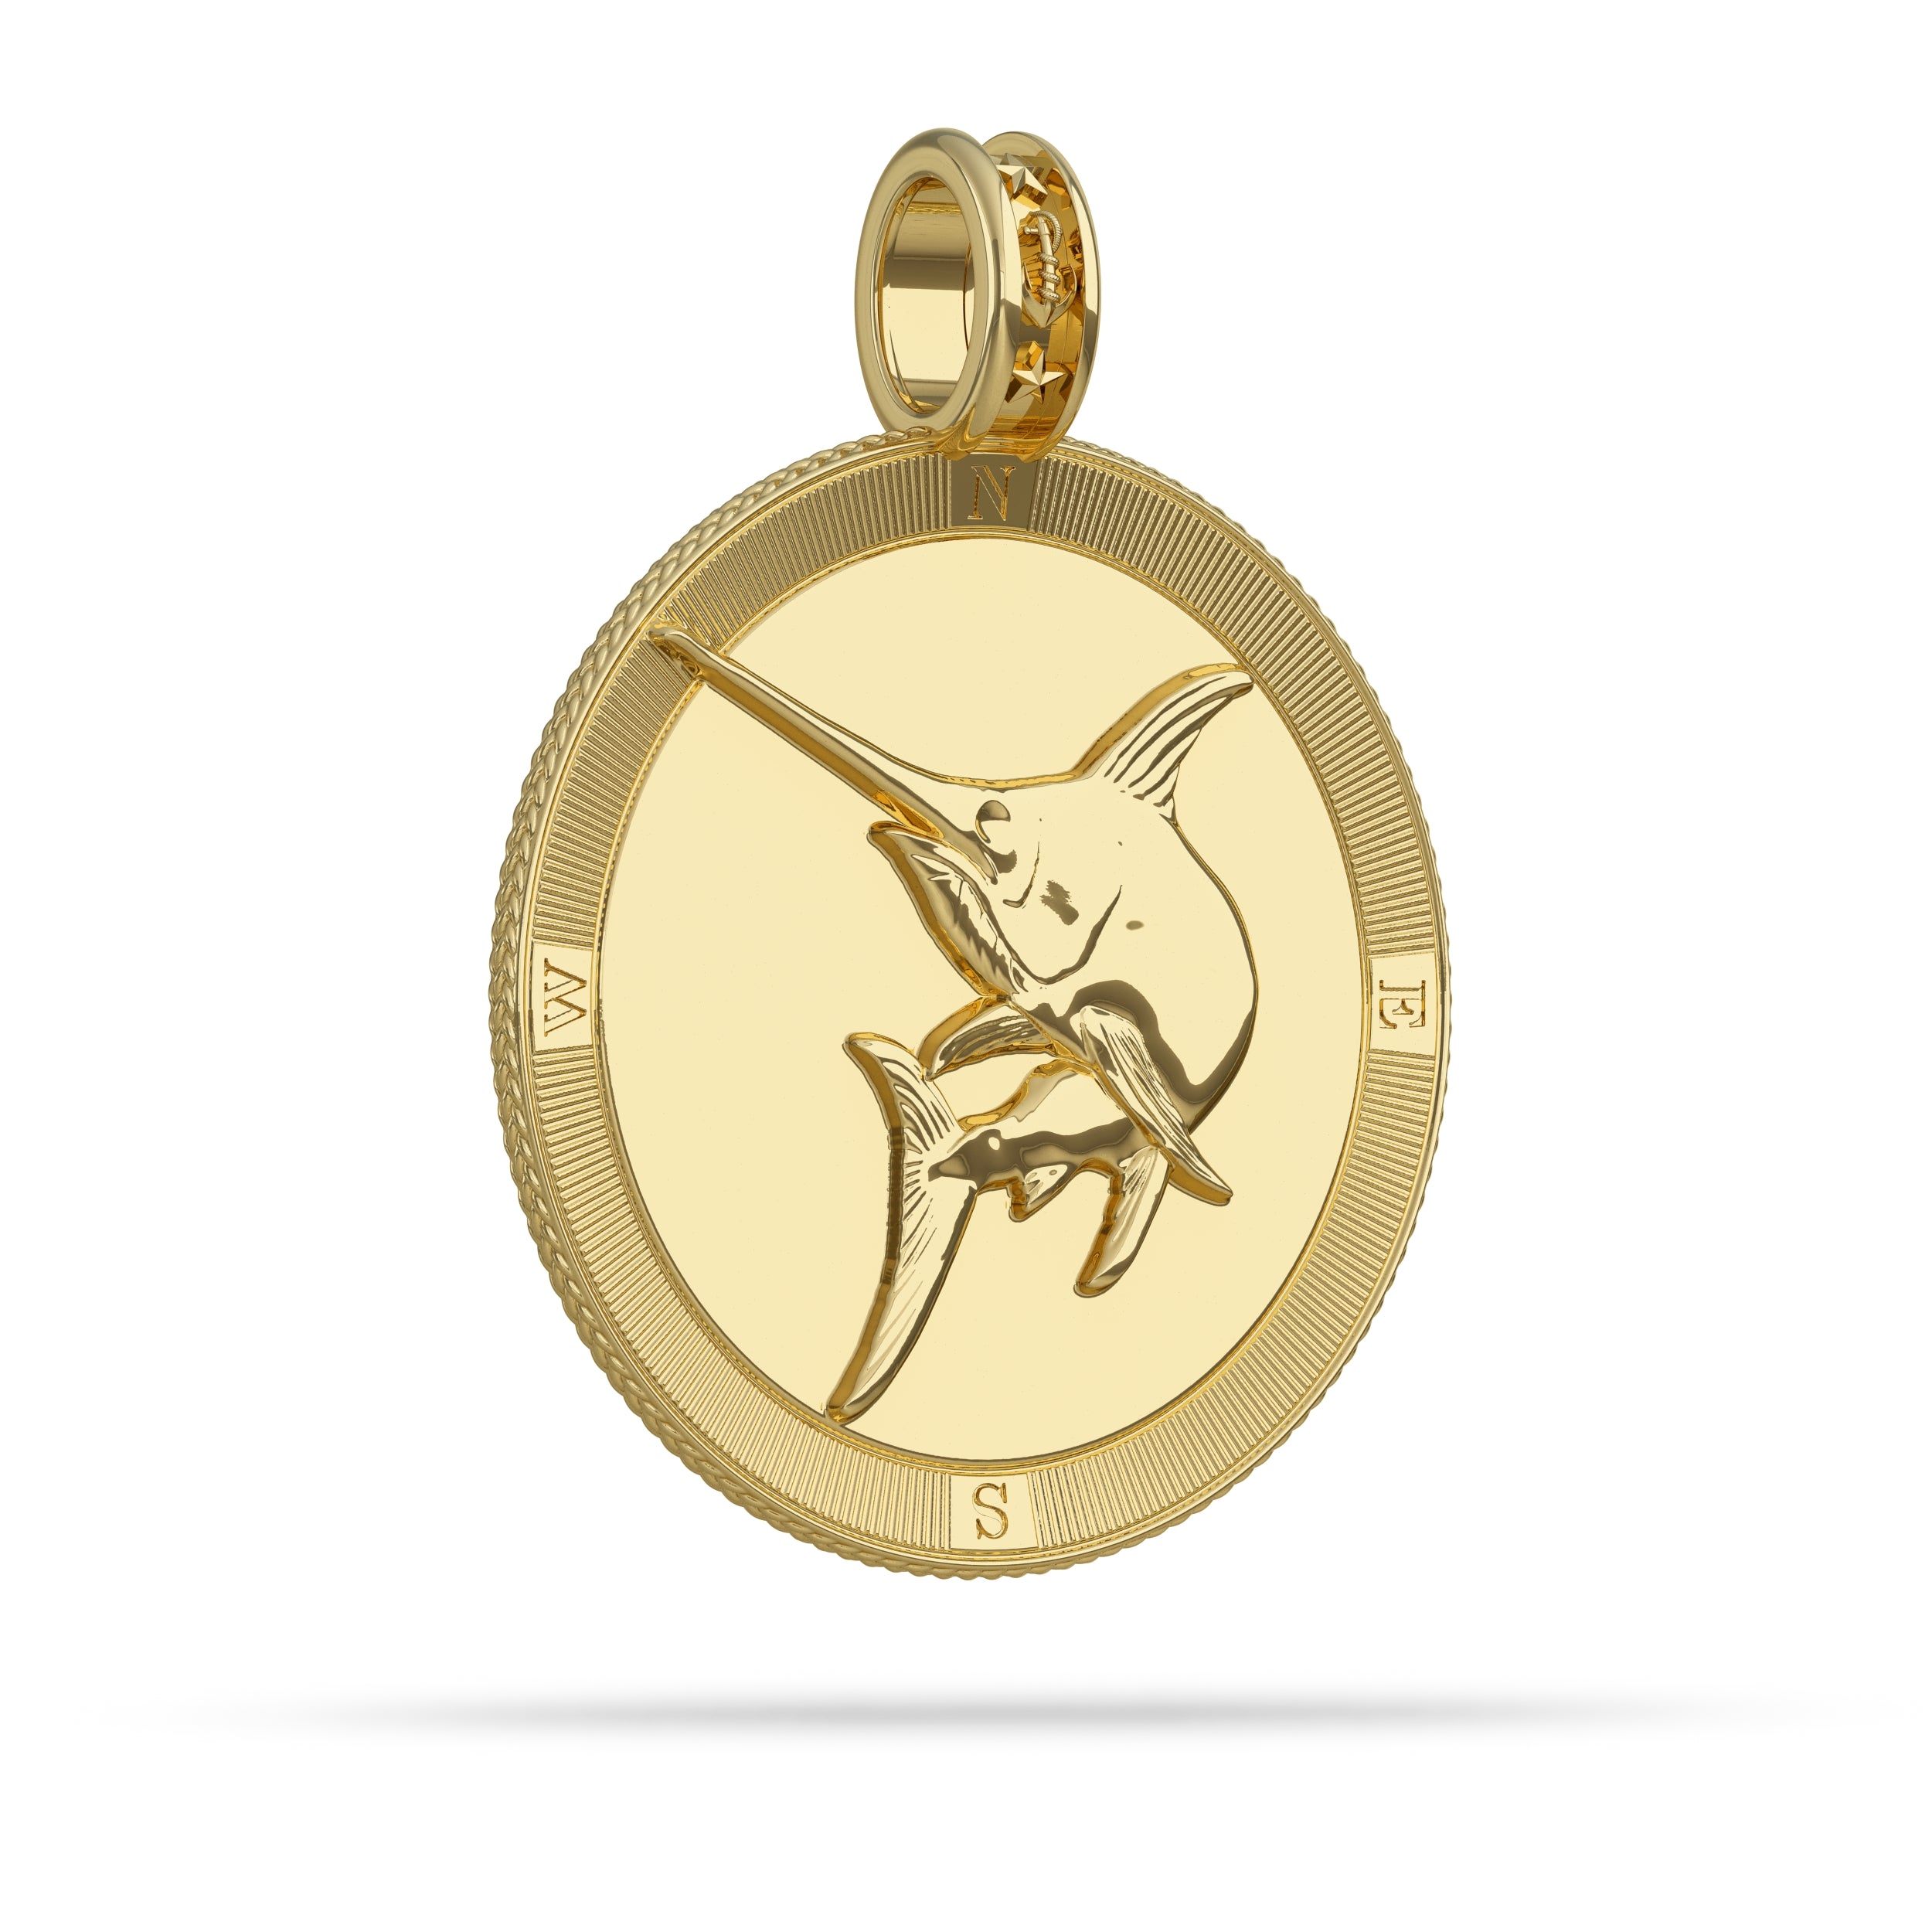  Swordfish Compass Medallion Pendant Large in solid Gold by Nautical Treasure